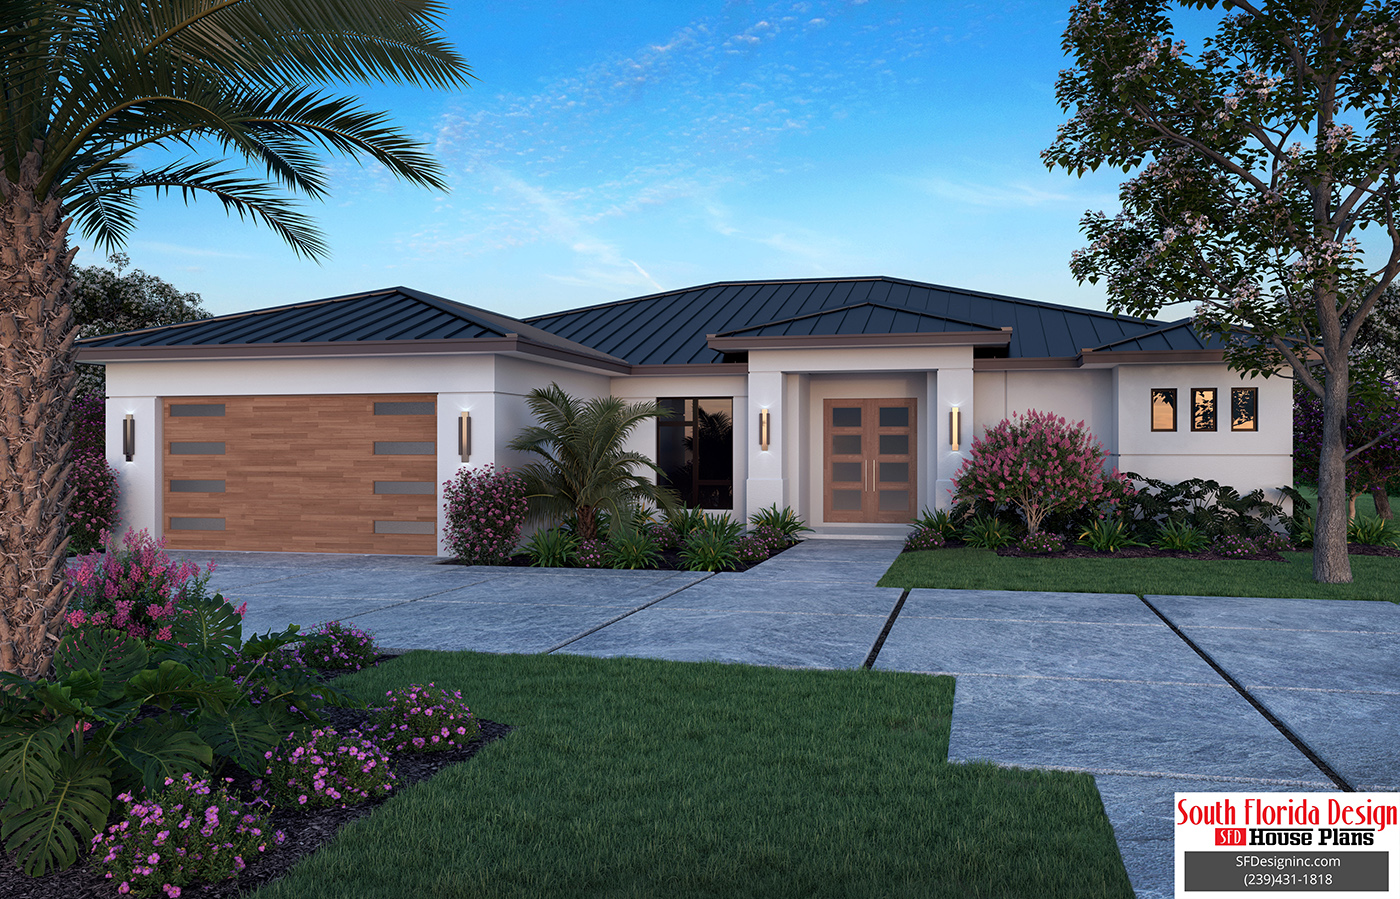 Color front elevation rendering of a 1-story 2174sf house plan